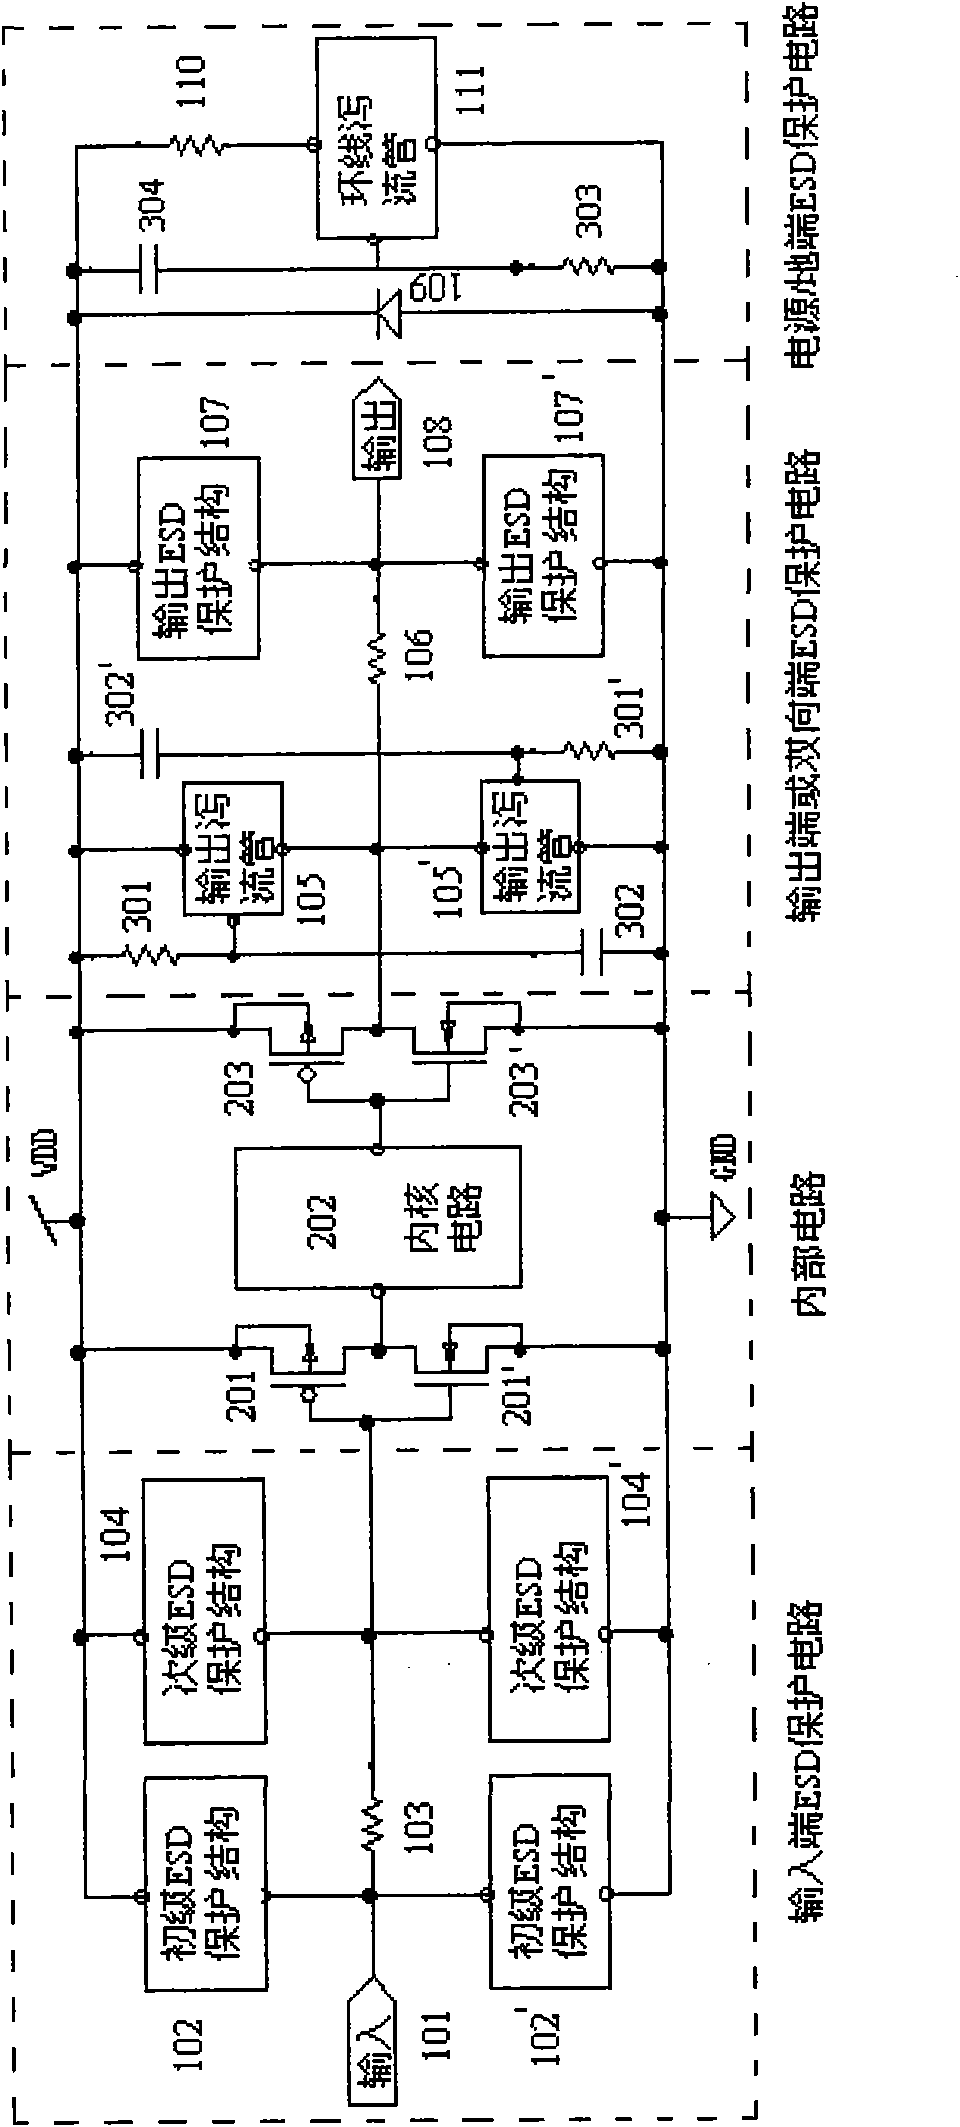 Silicon-on-insulator (SOI) circuit ESD global protecting structure